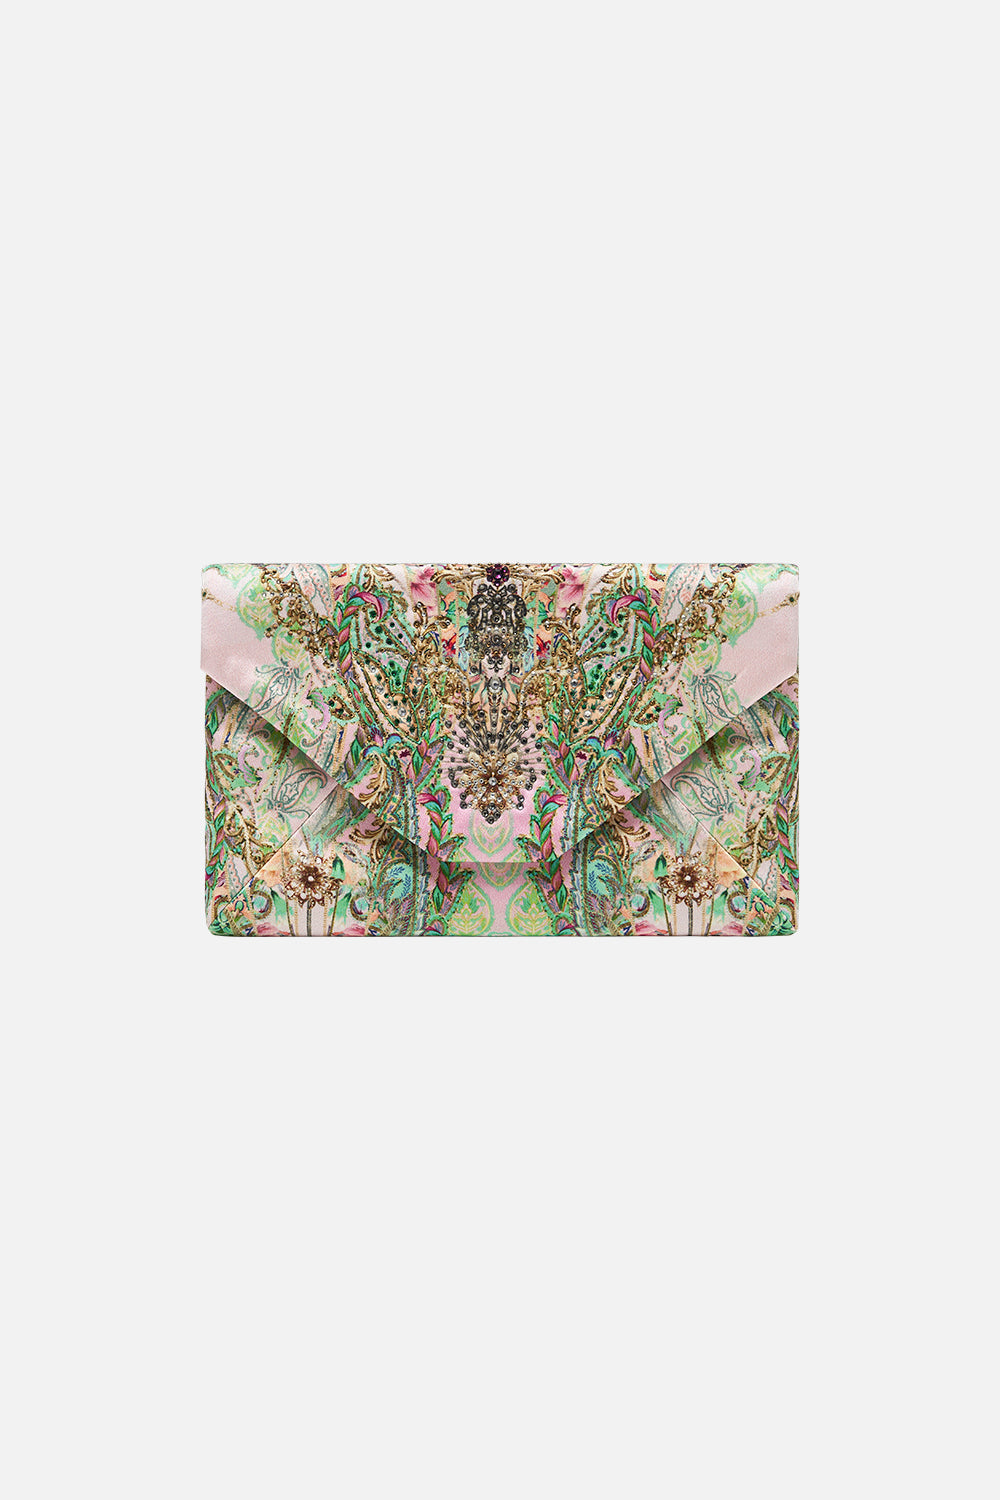 Envelope Clutch Lost City print by CAMILLA